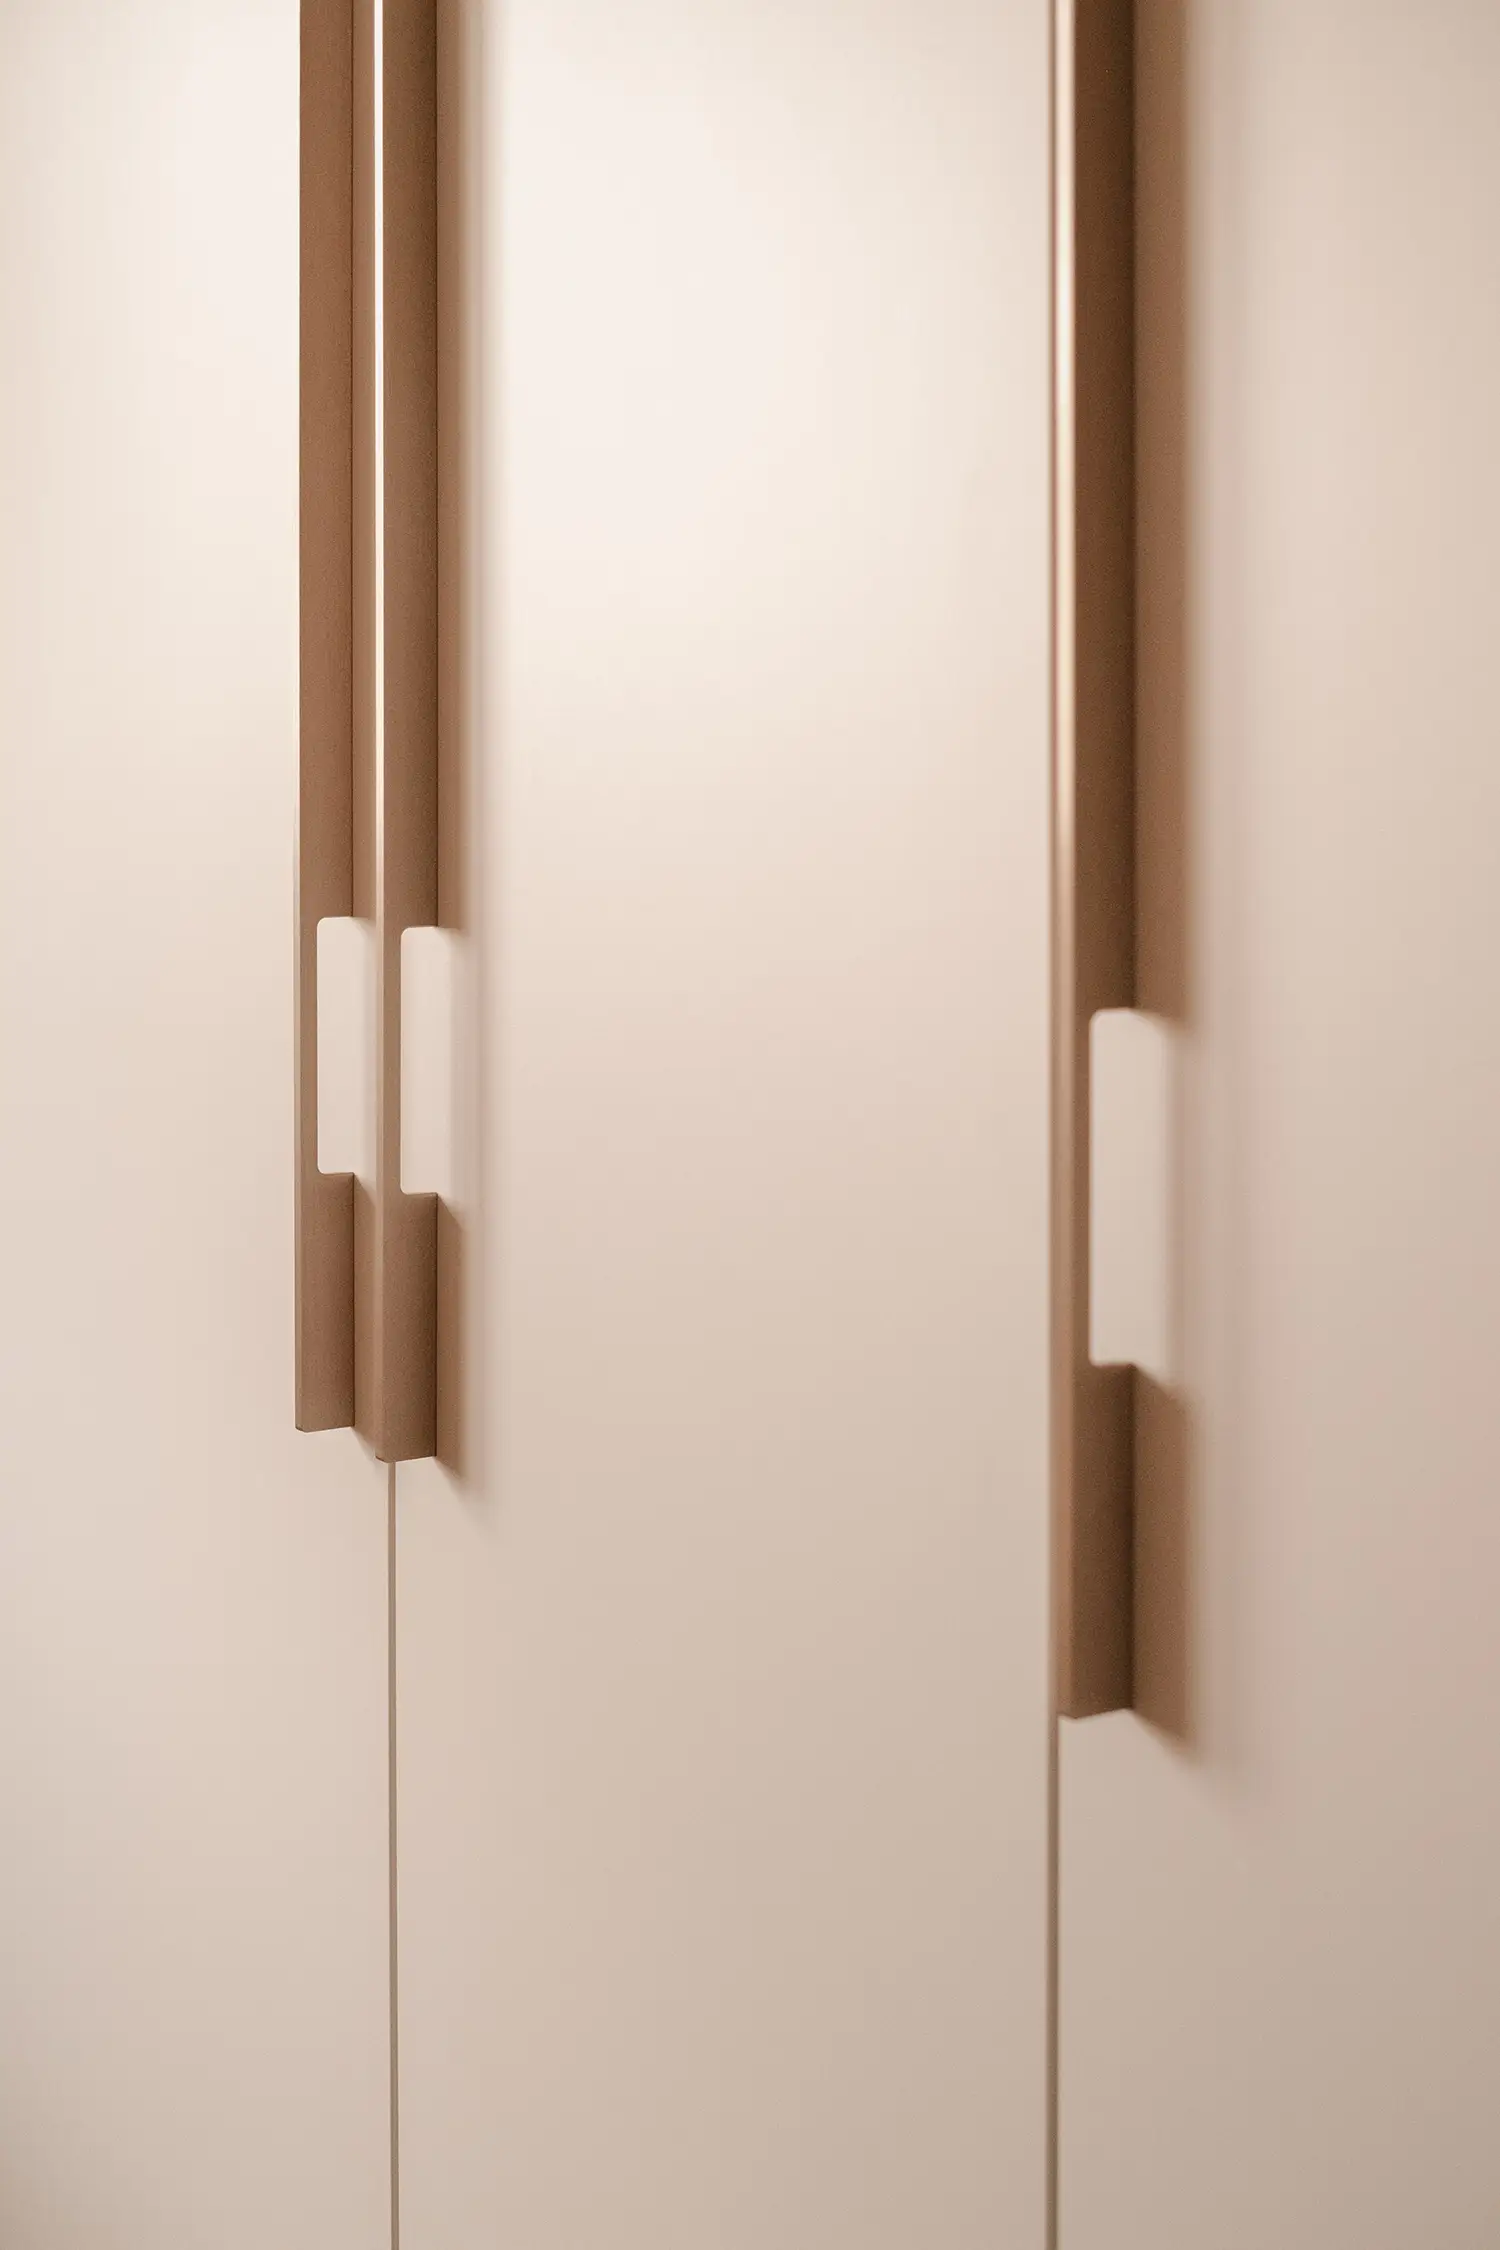 Detail photo of the handles of a closet in a bedroom. Renovation project by studio Elles Interior Design.